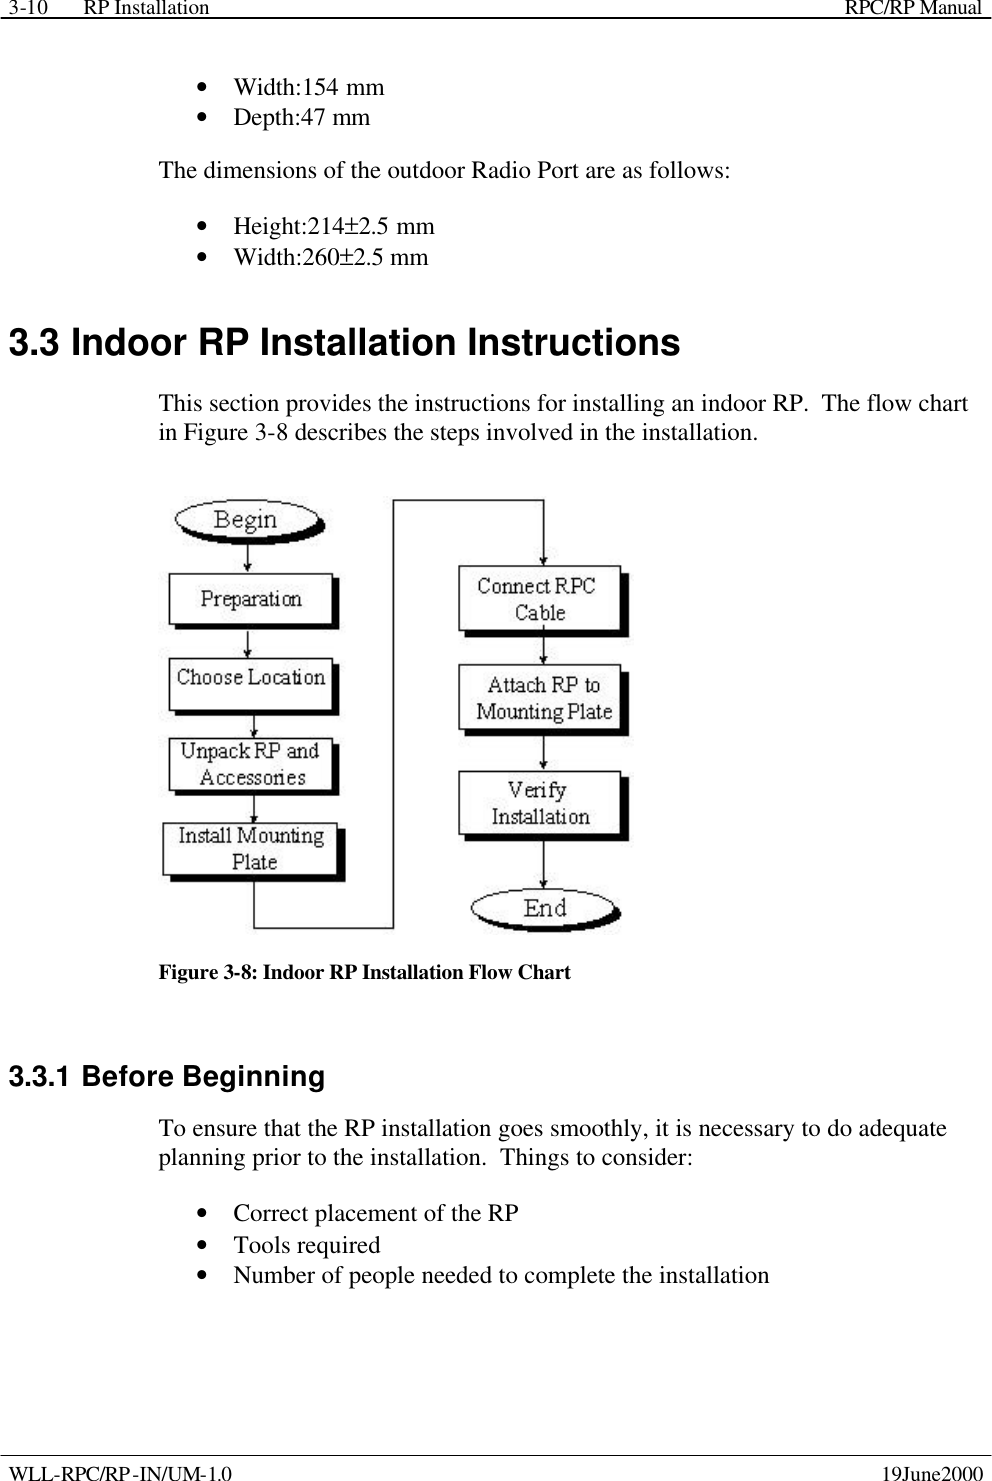 RP Installation    RPC/RP Manual WLL-RPC/RP-IN/UM-1.0    19June2000 3-10• Width:154 mm • Depth:47 mm  The dimensions of the outdoor Radio Port are as follows: • Height:214±2.5 mm • Width:260±2.5 mm  3.3 Indoor RP Installation Instructions This section provides the instructions for installing an indoor RP.  The flow chart in Figure 3-8 describes the steps involved in the installation.  Figure 3-8: Indoor RP Installation Flow Chart 3.3.1 Before Beginning To ensure that the RP installation goes smoothly, it is necessary to do adequate planning prior to the installation.  Things to consider: • Correct placement of the RP • Tools required • Number of people needed to complete the installation 